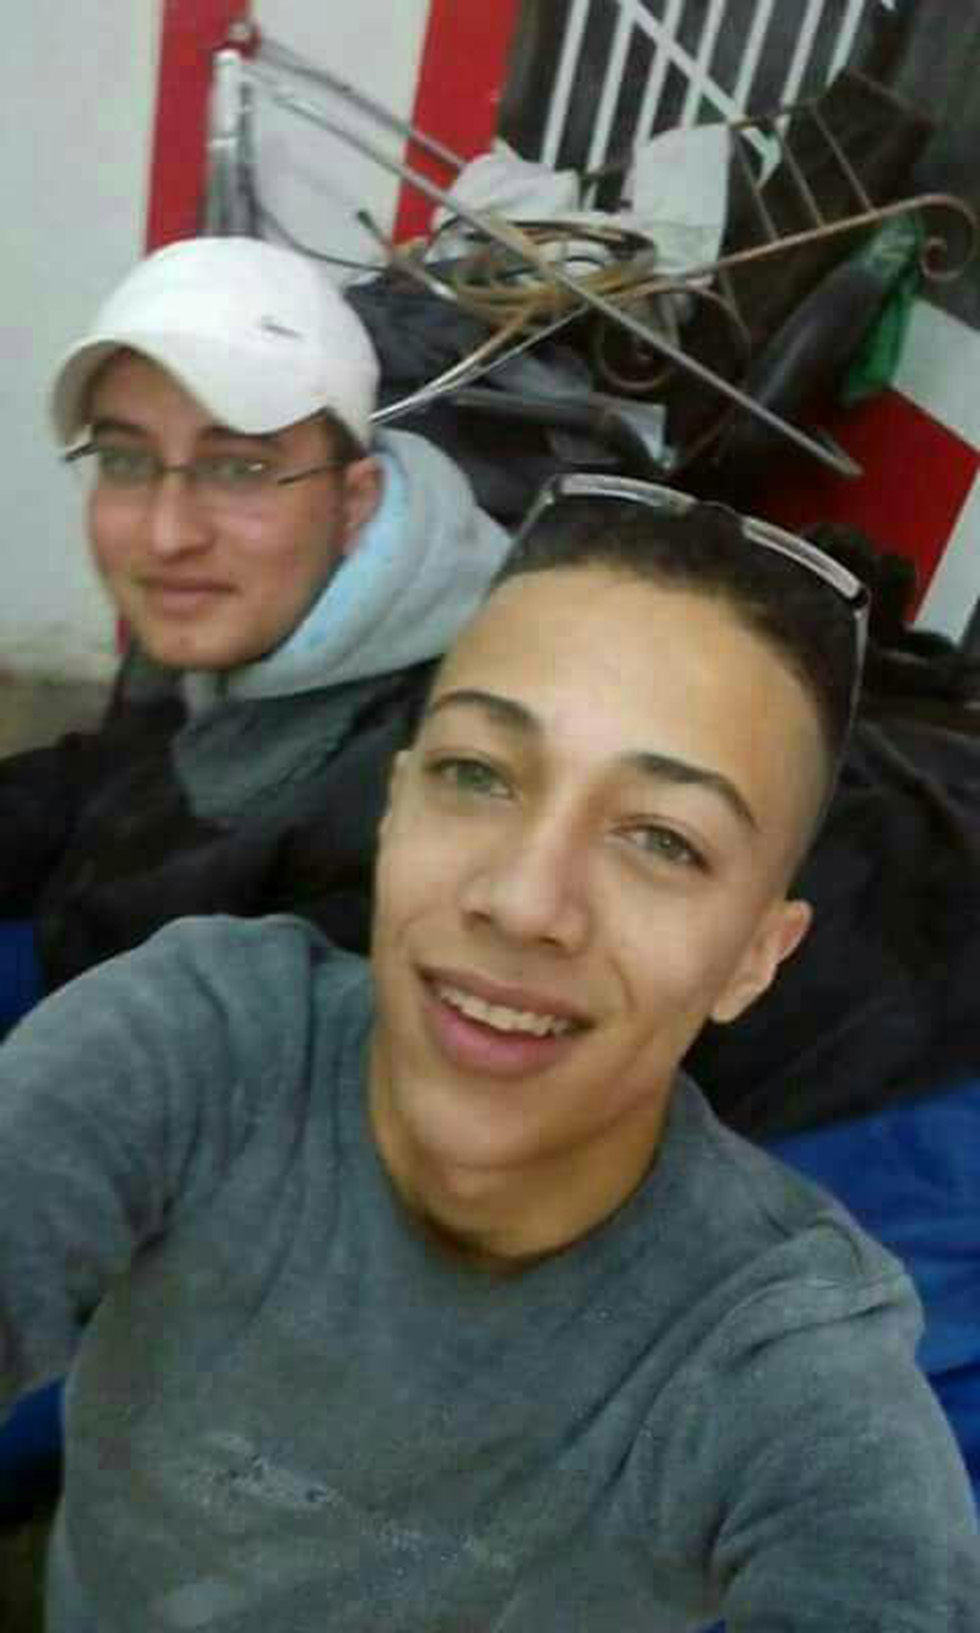 The two cousins. In front: the killer of Shlomit Krigman. Behind: the youth who attempted the vehicular terror attack